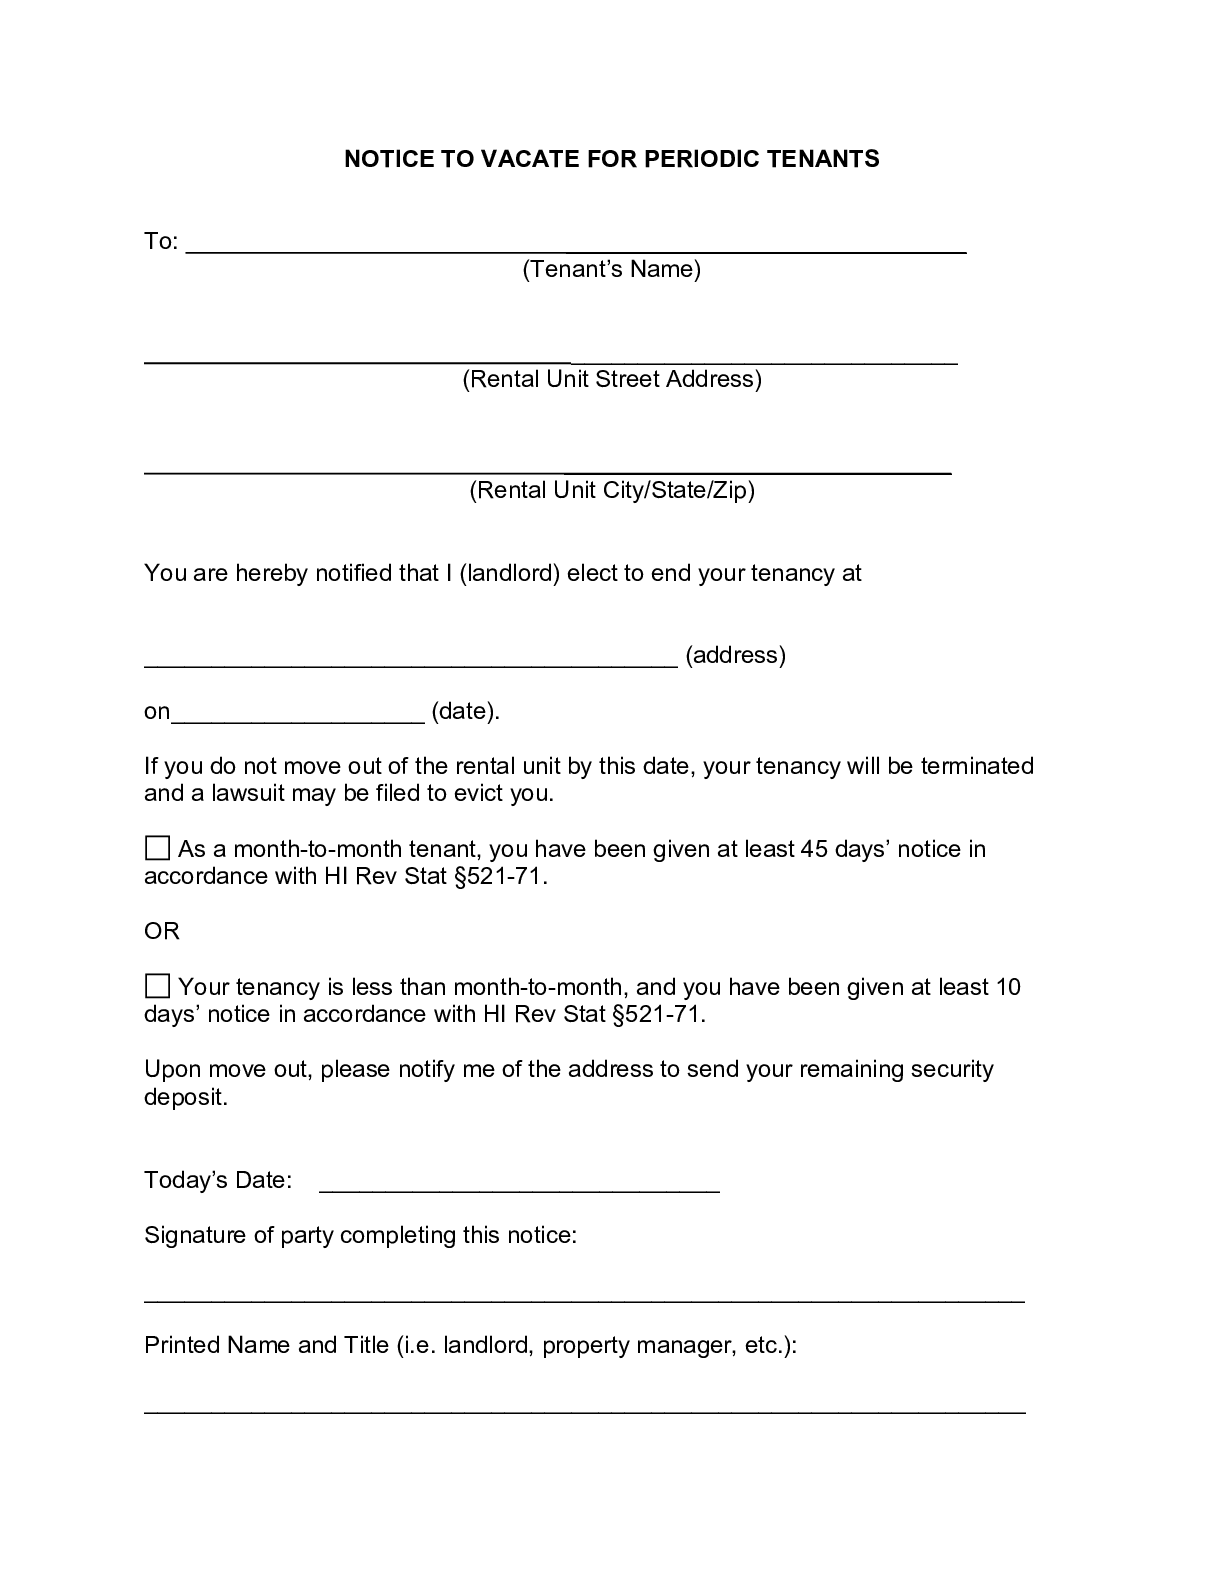 FREE Hawaii Eviction Notice Form [2021] Notice to Vacate PDF